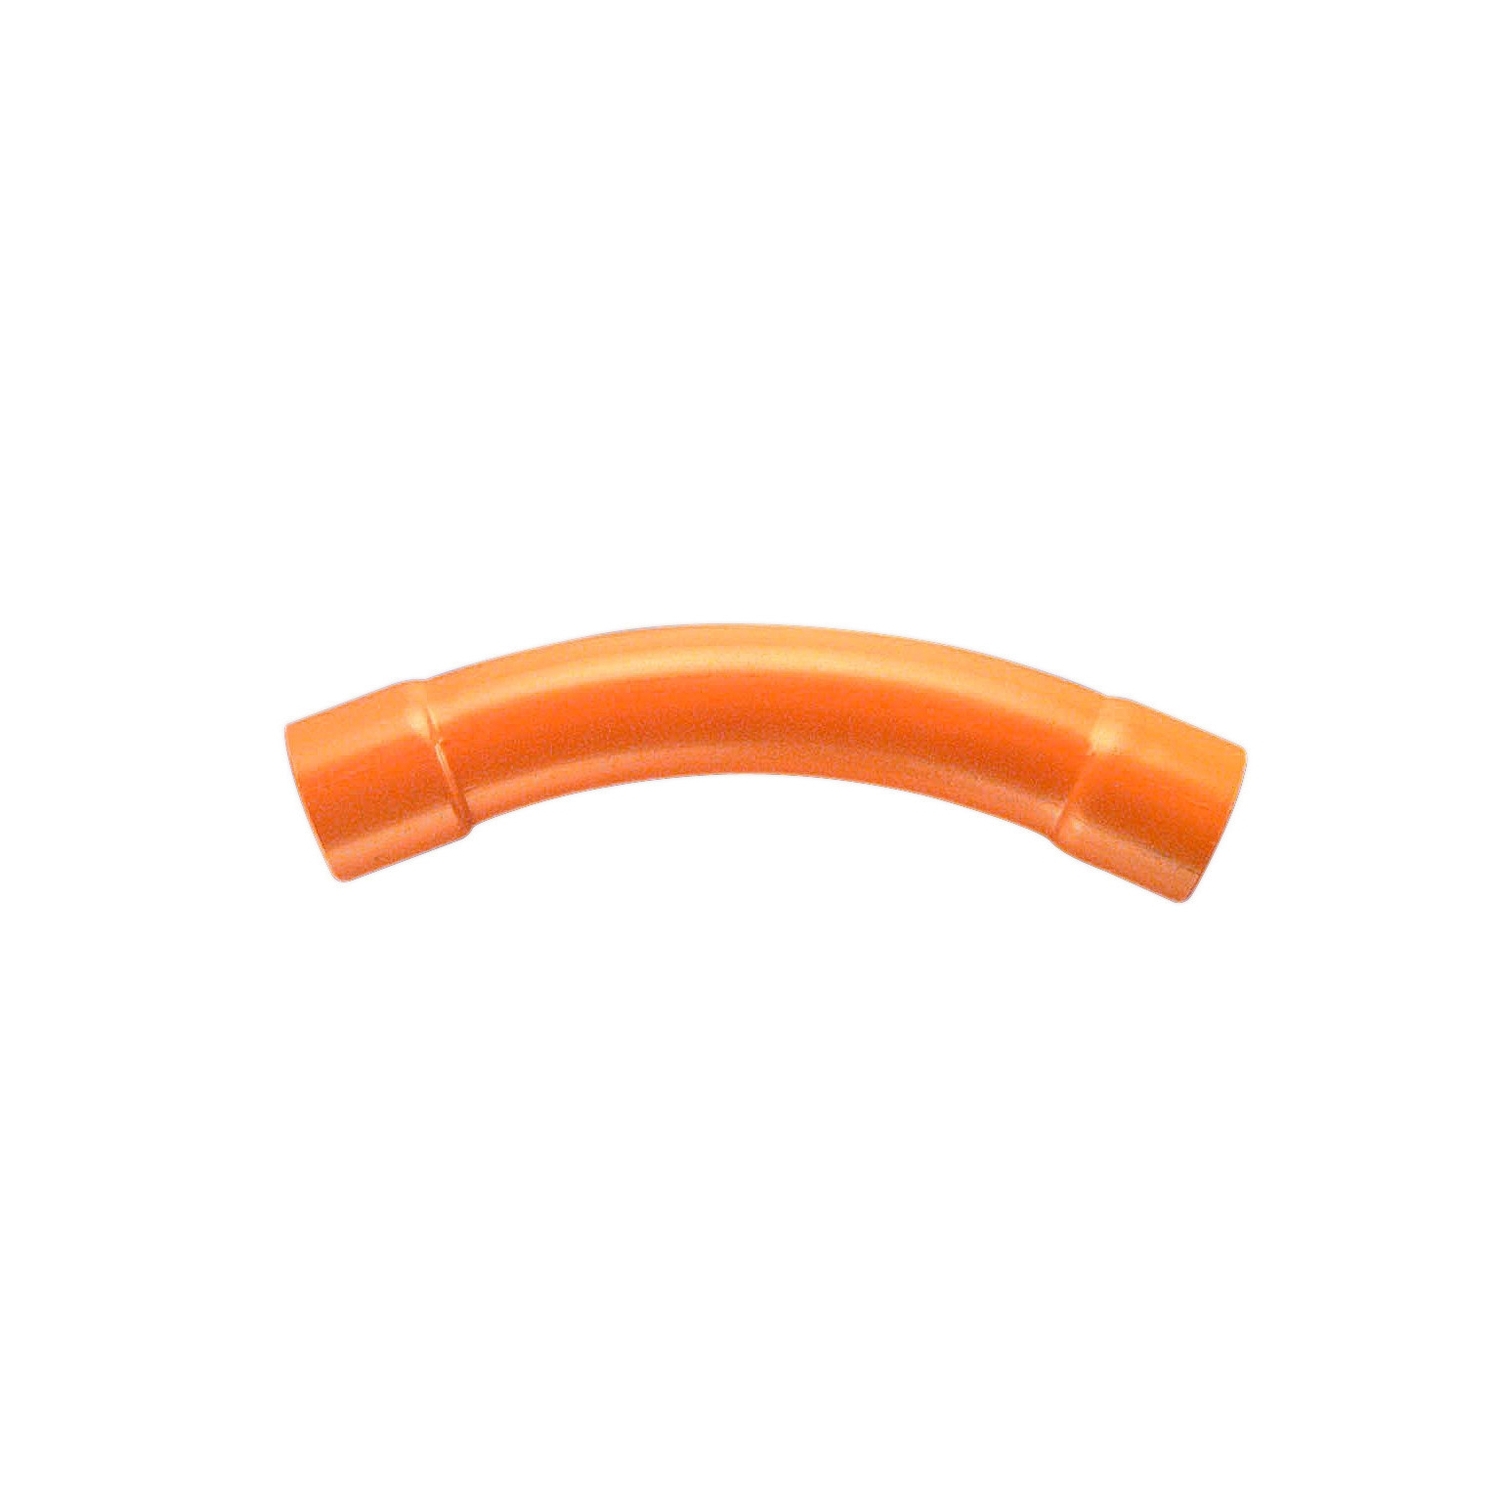 Solid Fittings - PVC, 45 Degree Heavy Duty Sweep Bends, 32mm, Grey